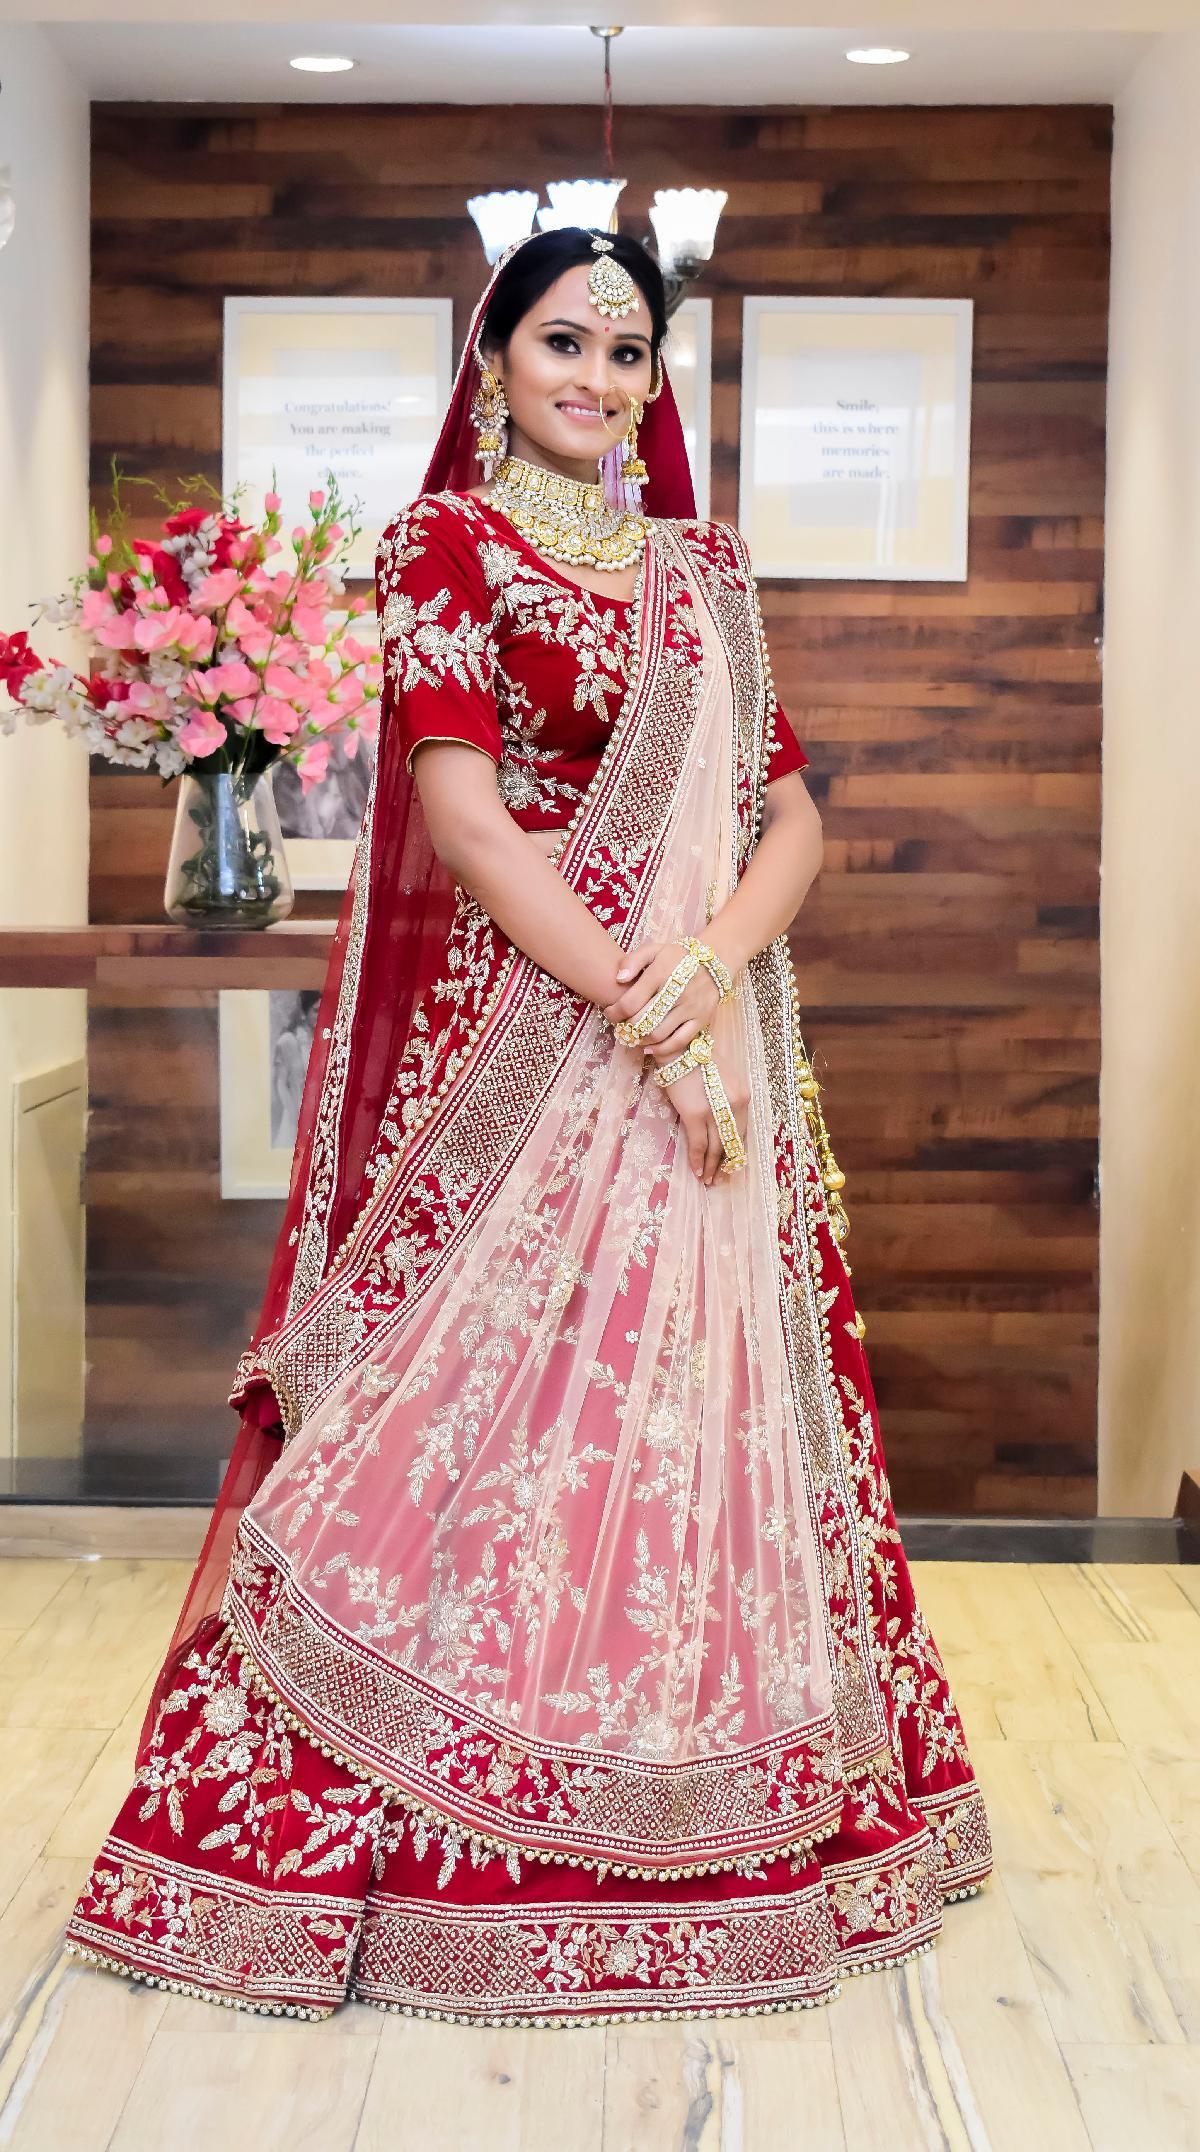 Classy Red Designer Indian Bridal lehenga choli with Embroidery Bespoke  made to order -